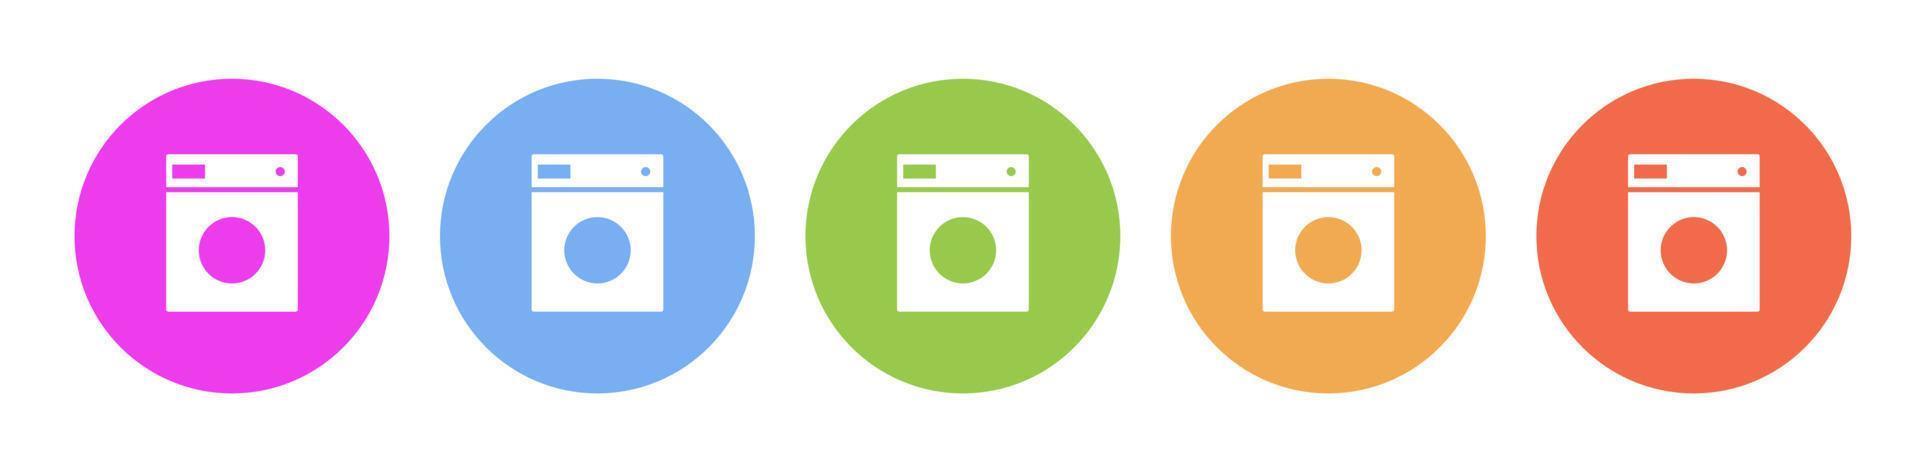 Multi colored flat icons on round backgrounds. Washer multicolor circle vector icon on white background